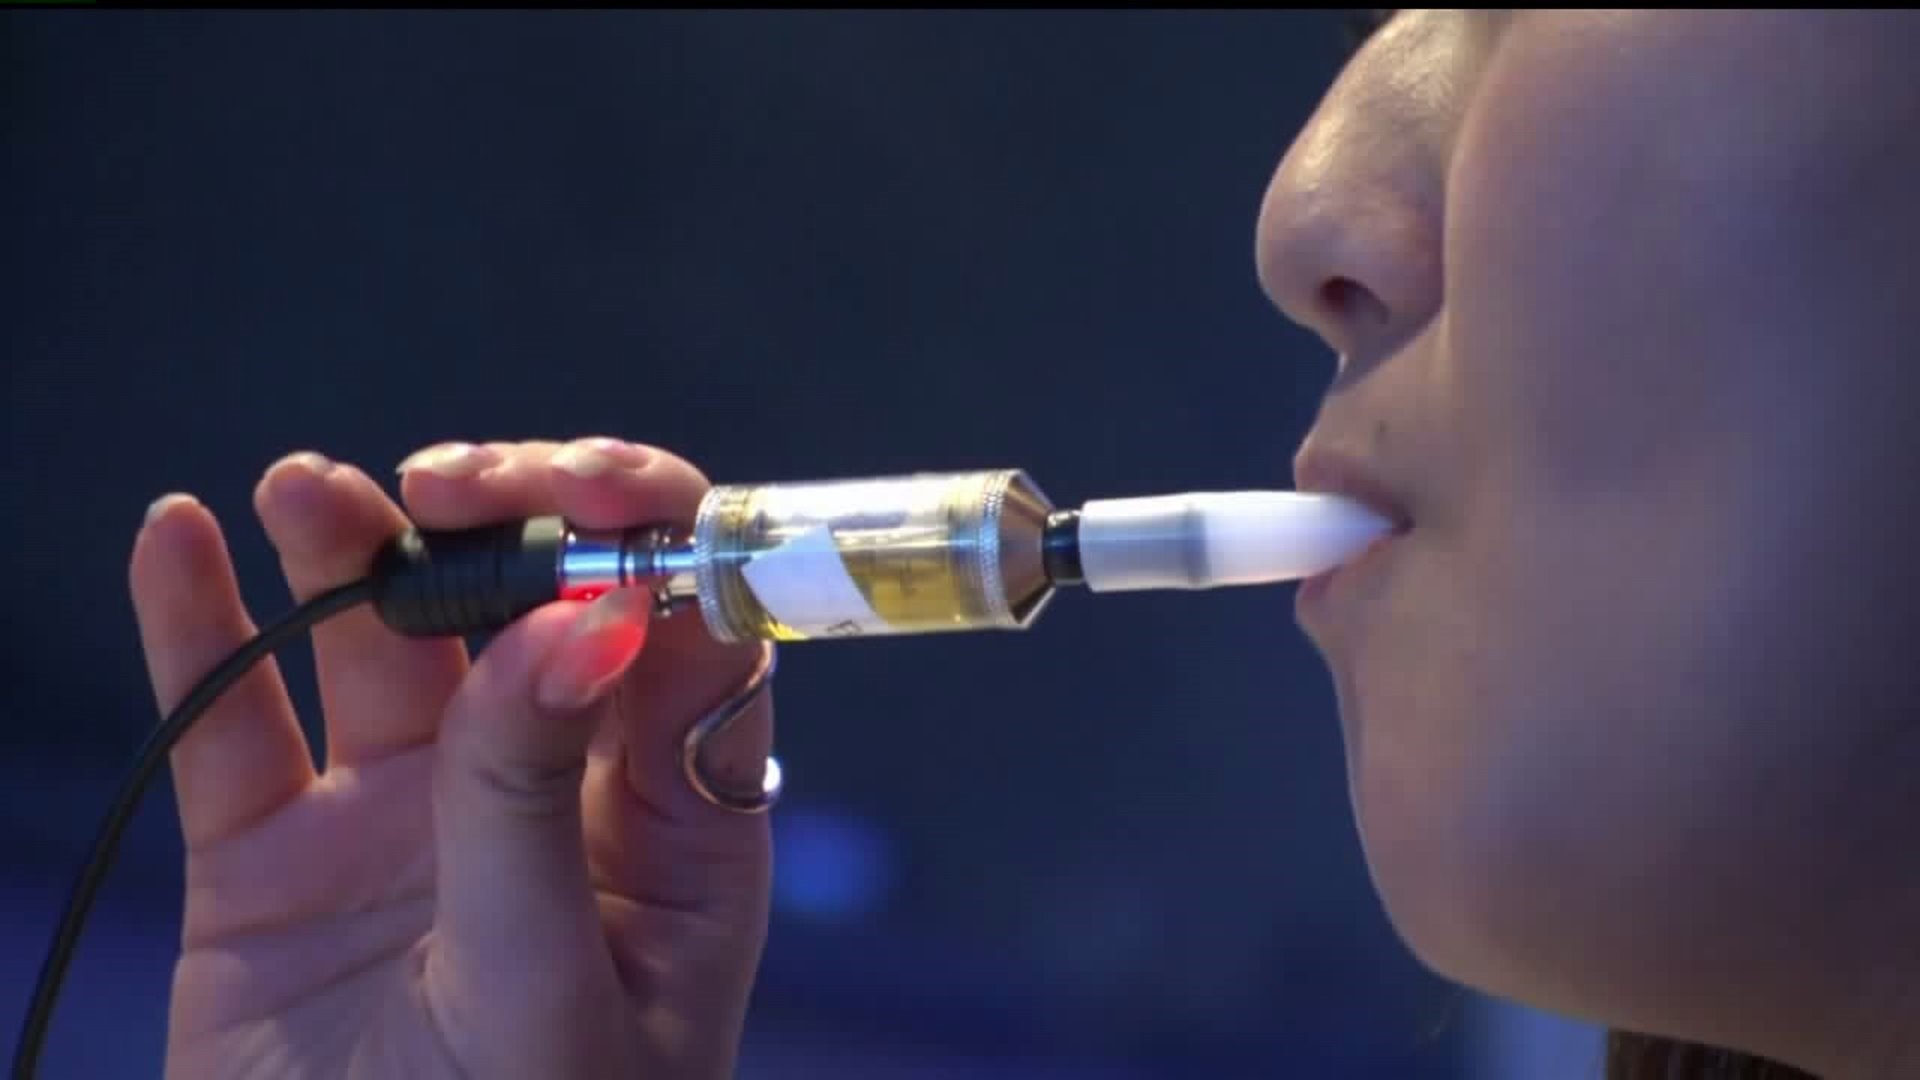 4 Iowans with respiratory illness have vaping history, according to state records